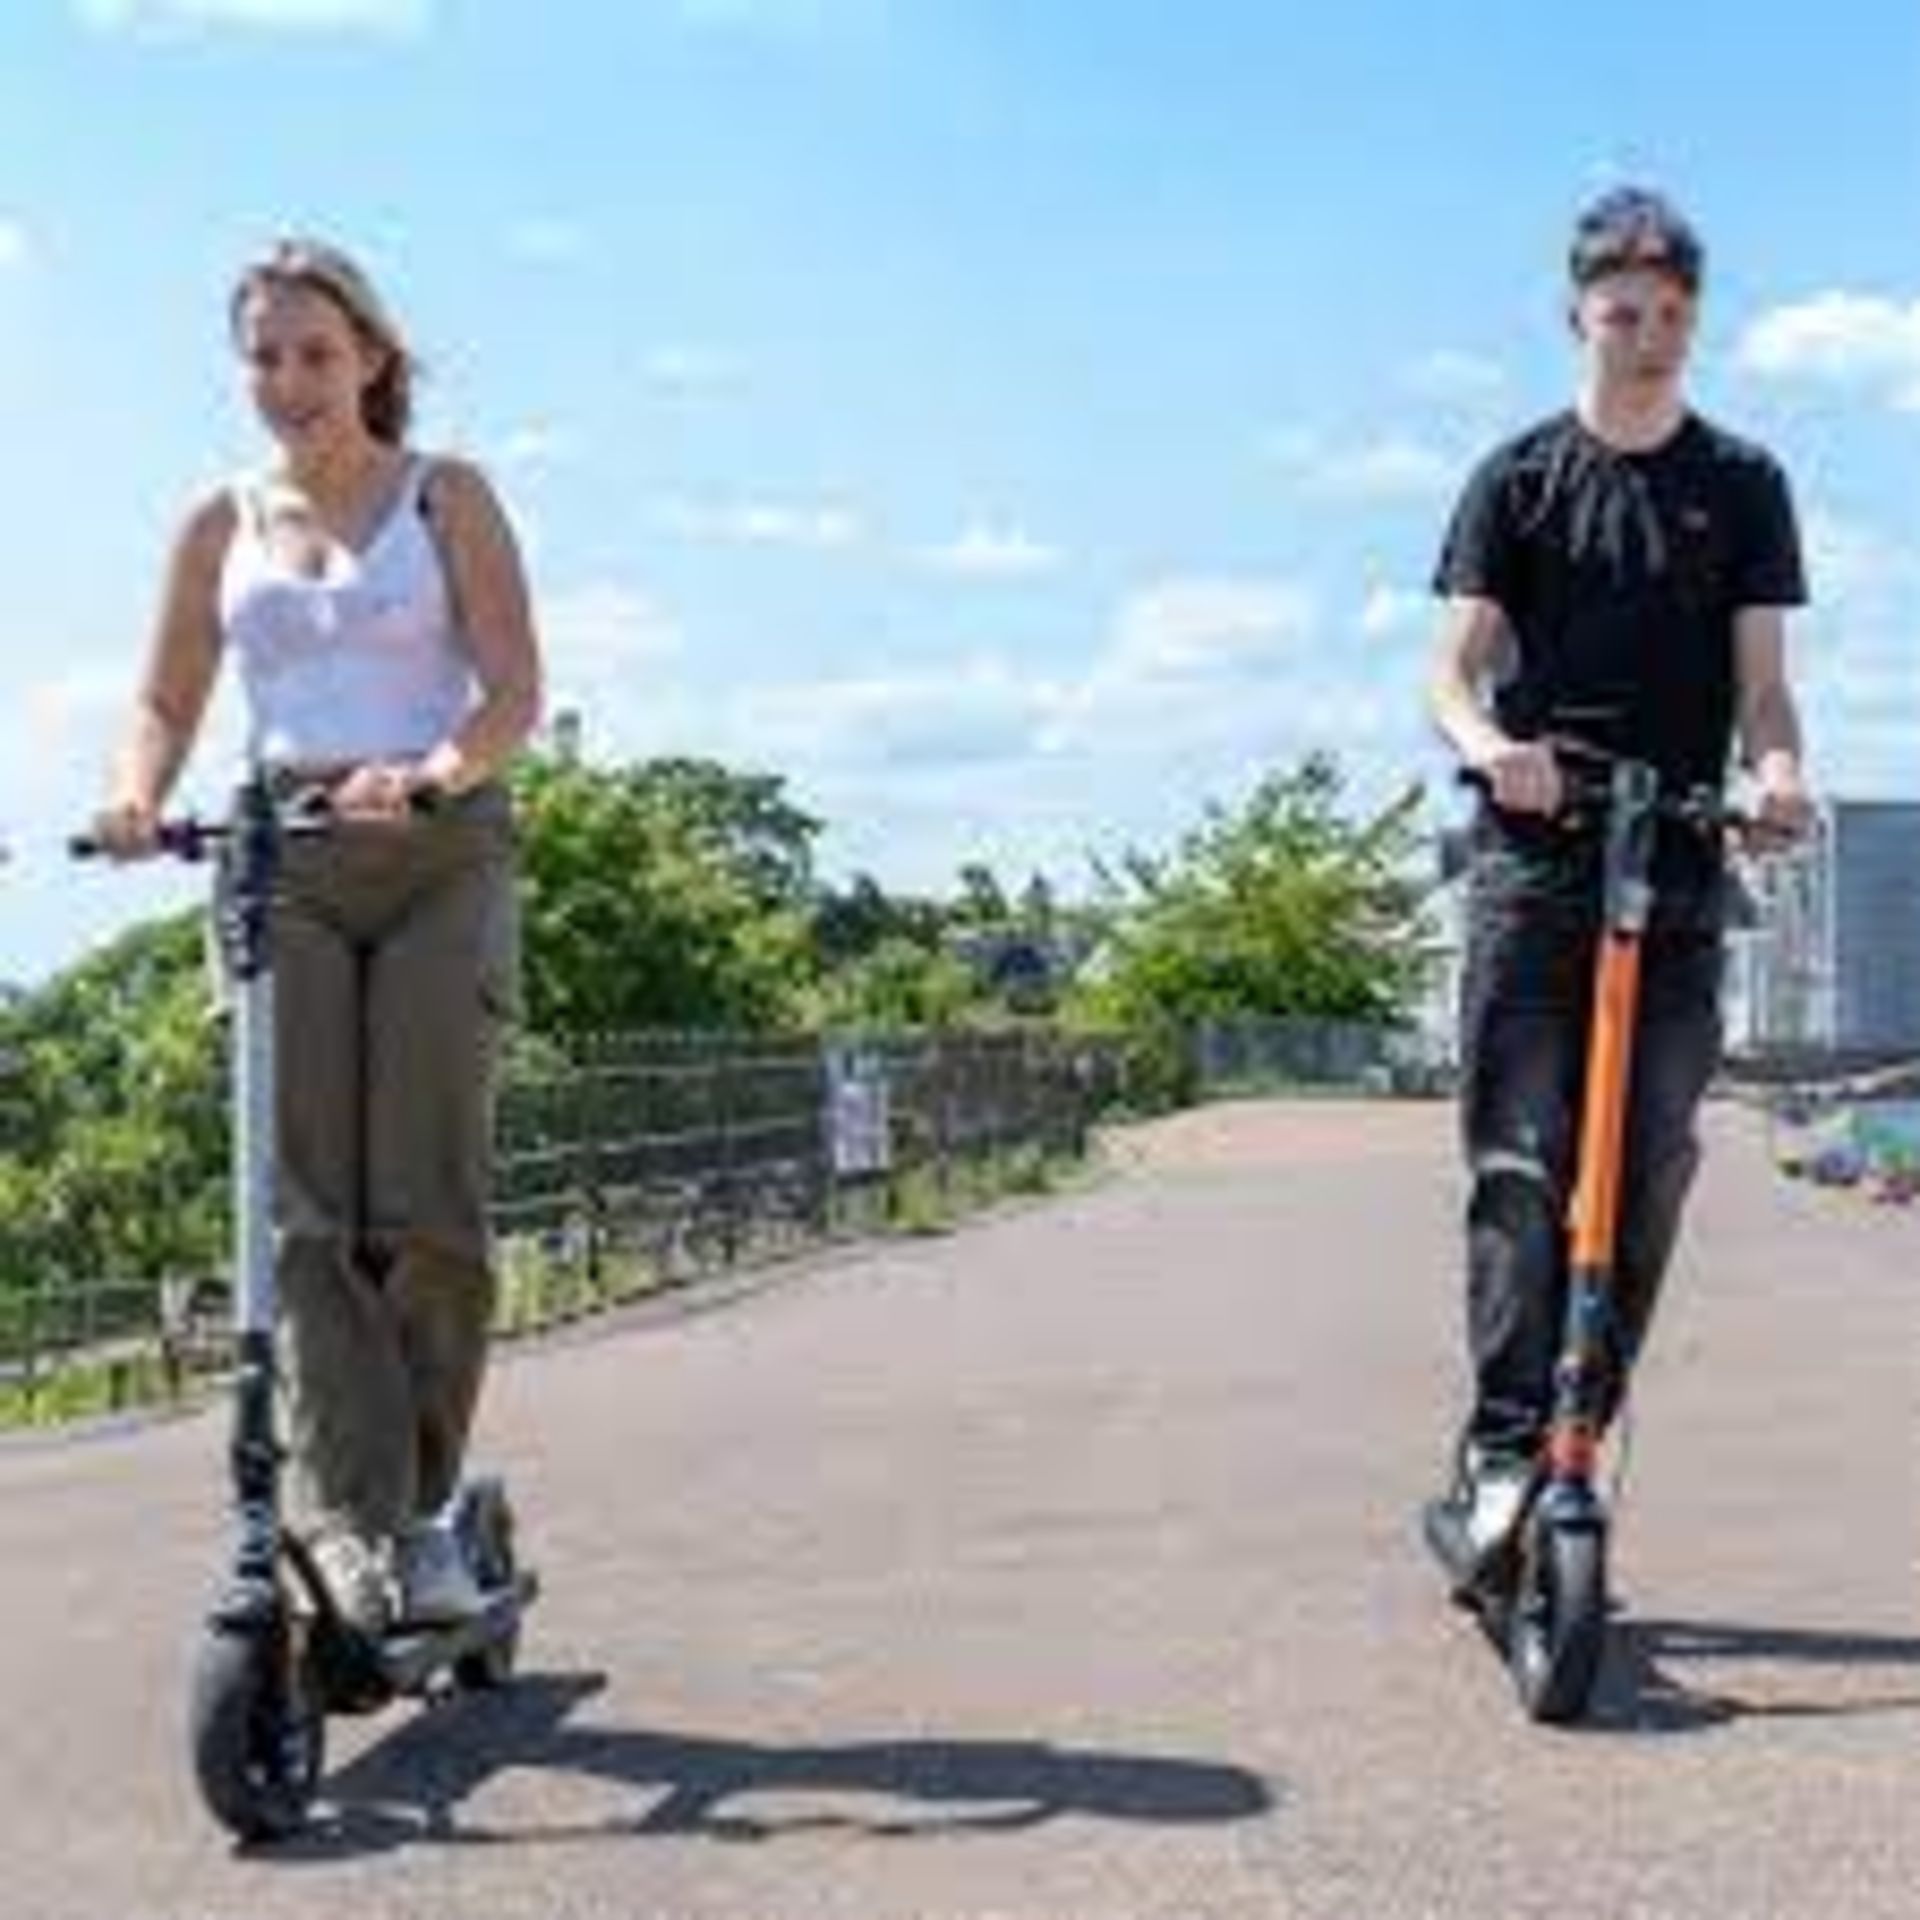 Brand New E-Glide V2 Electric Scooter Grey and Black RRP £599, Introducing a sleek and efficient - Bild 3 aus 3